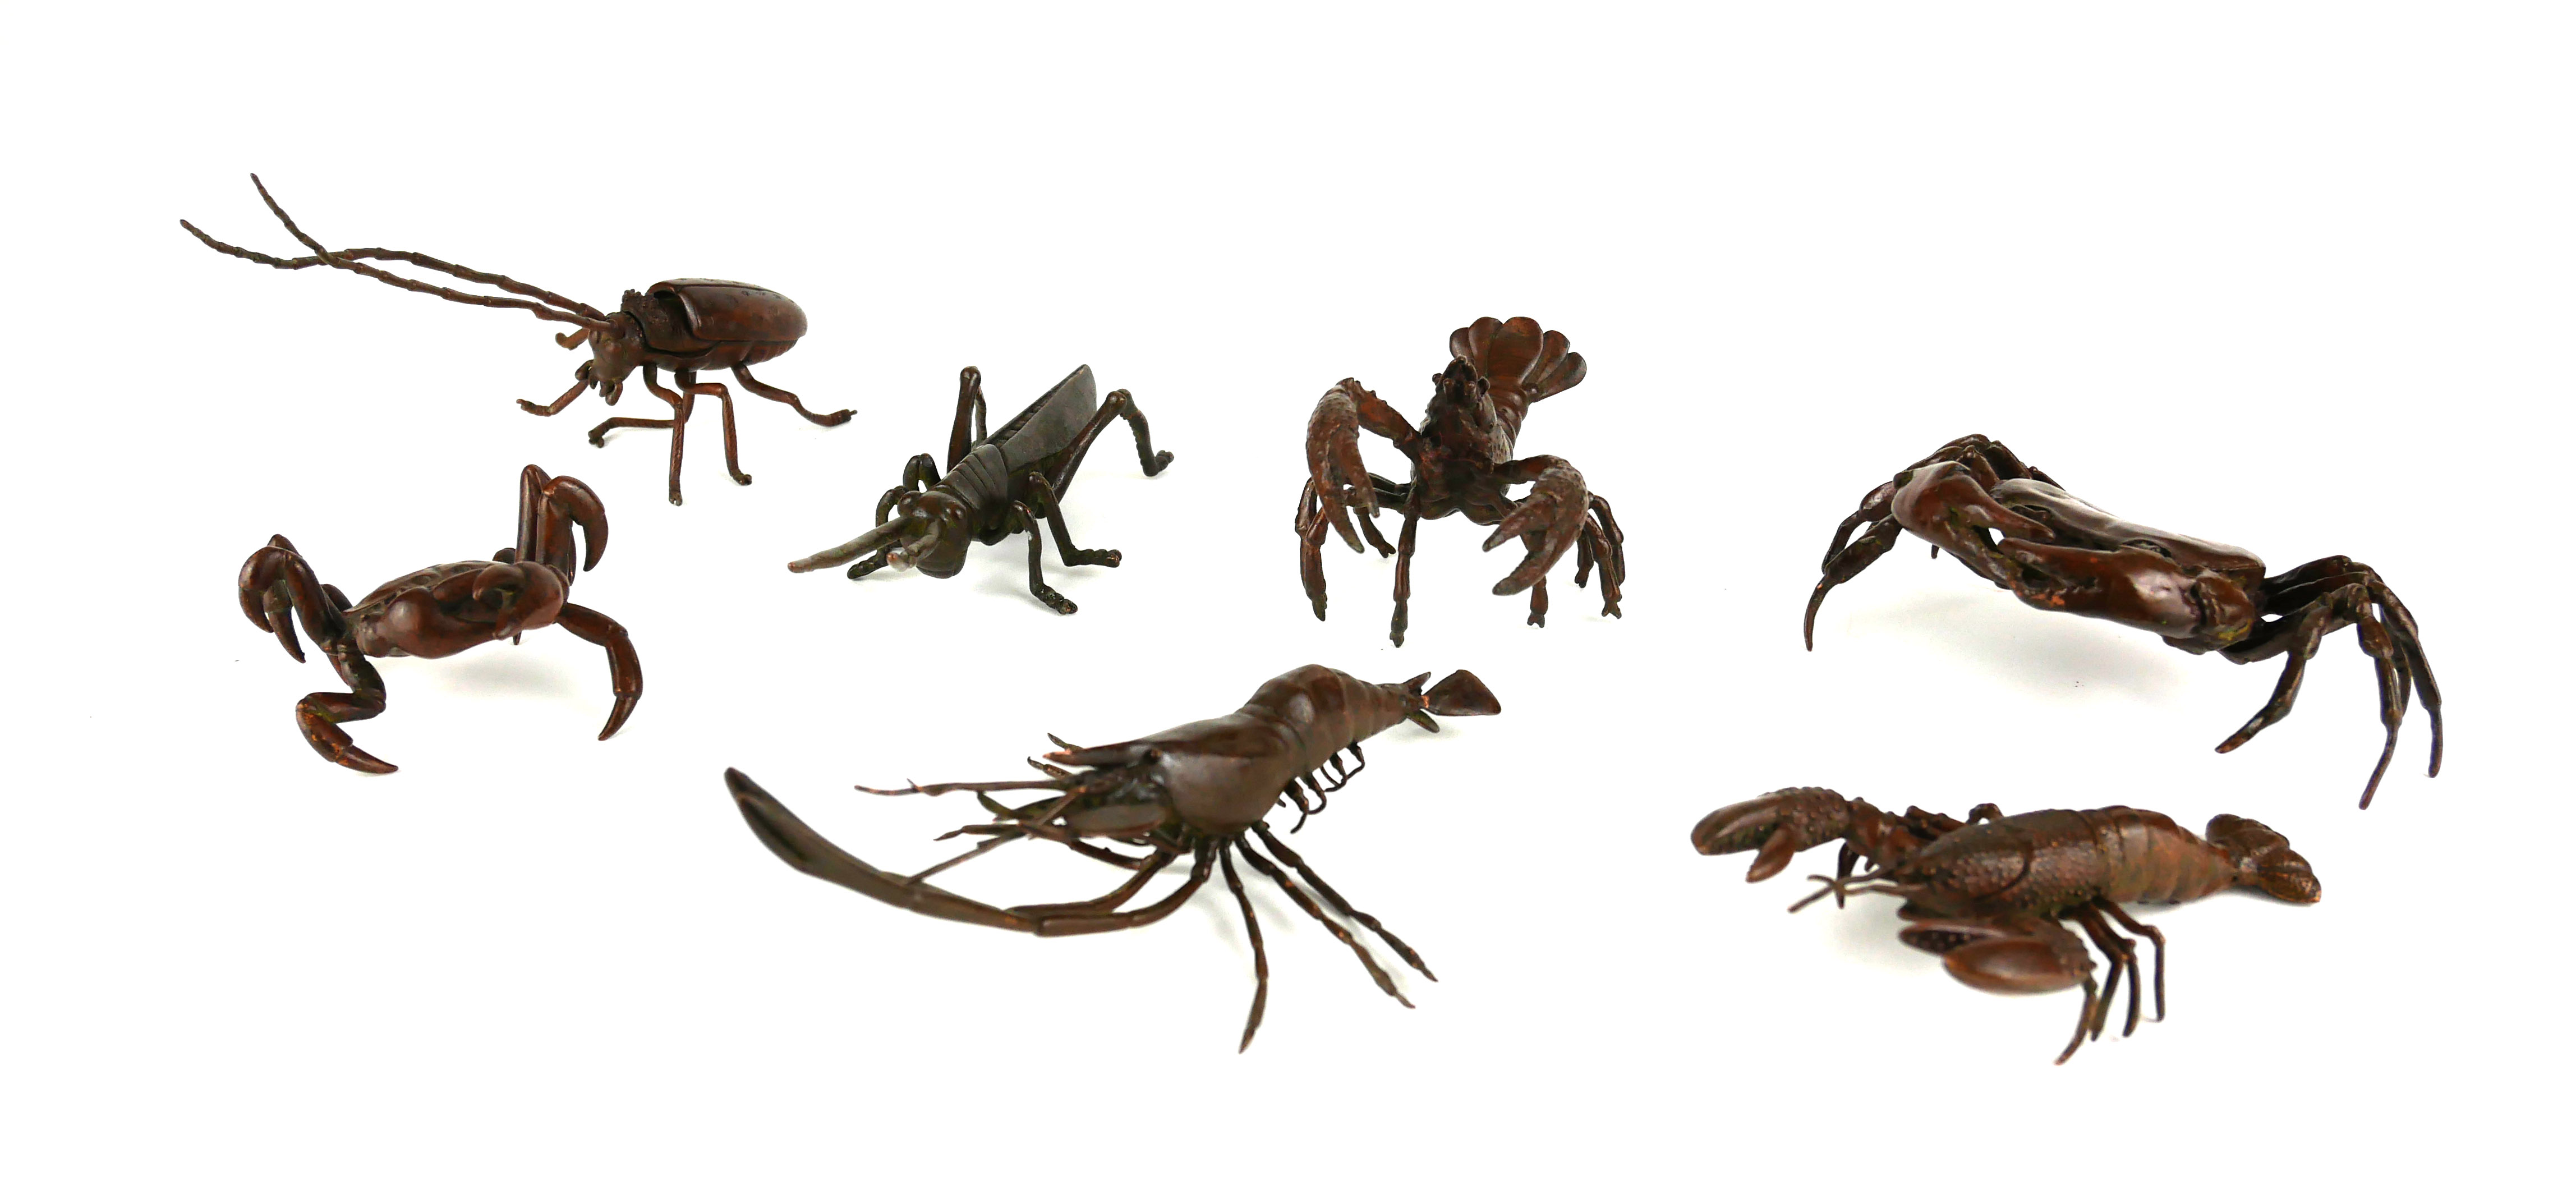 A COLLECTION OF SEVEN BRONZE ANIMAL SCULPTURES Including crabs, beetles and other crustaceans. (